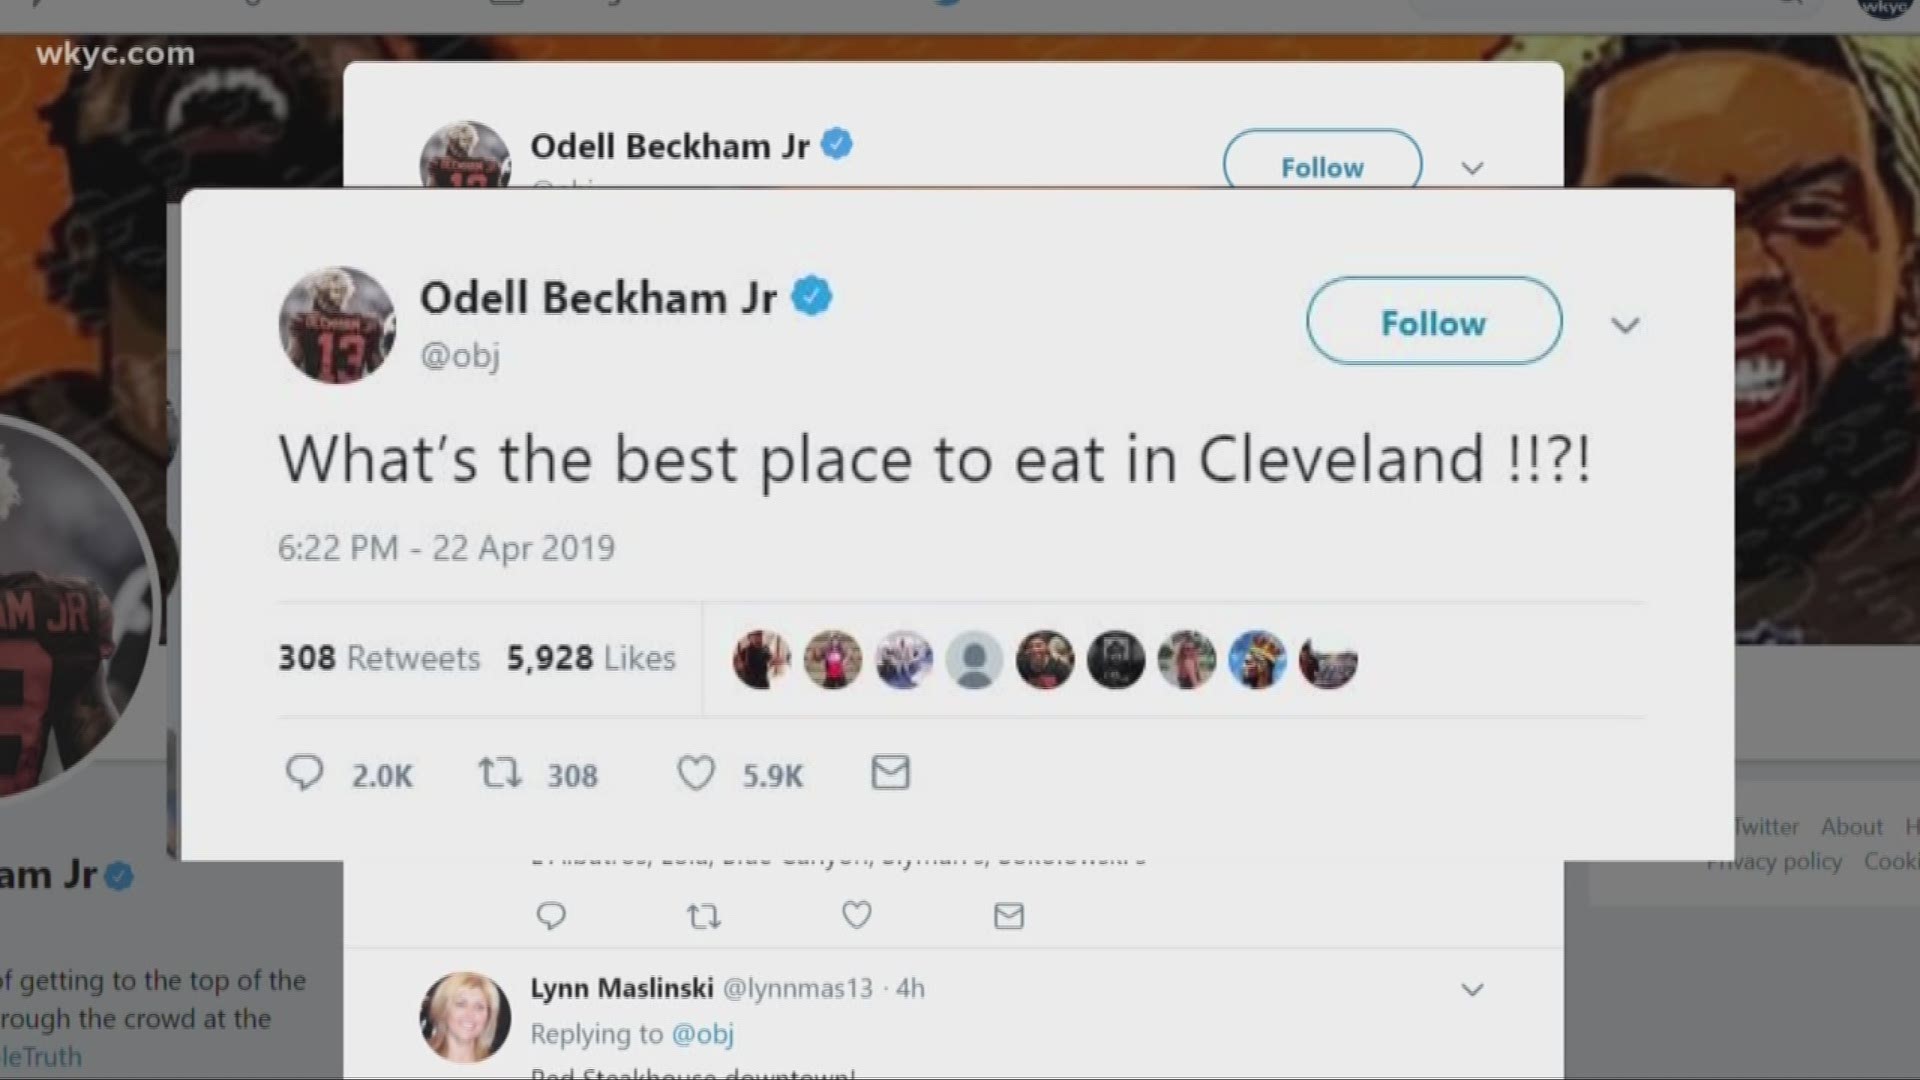 April 23, 2019: The Browns wide receiver is asking for your advice to help him find the best place to eat in Cleveland.